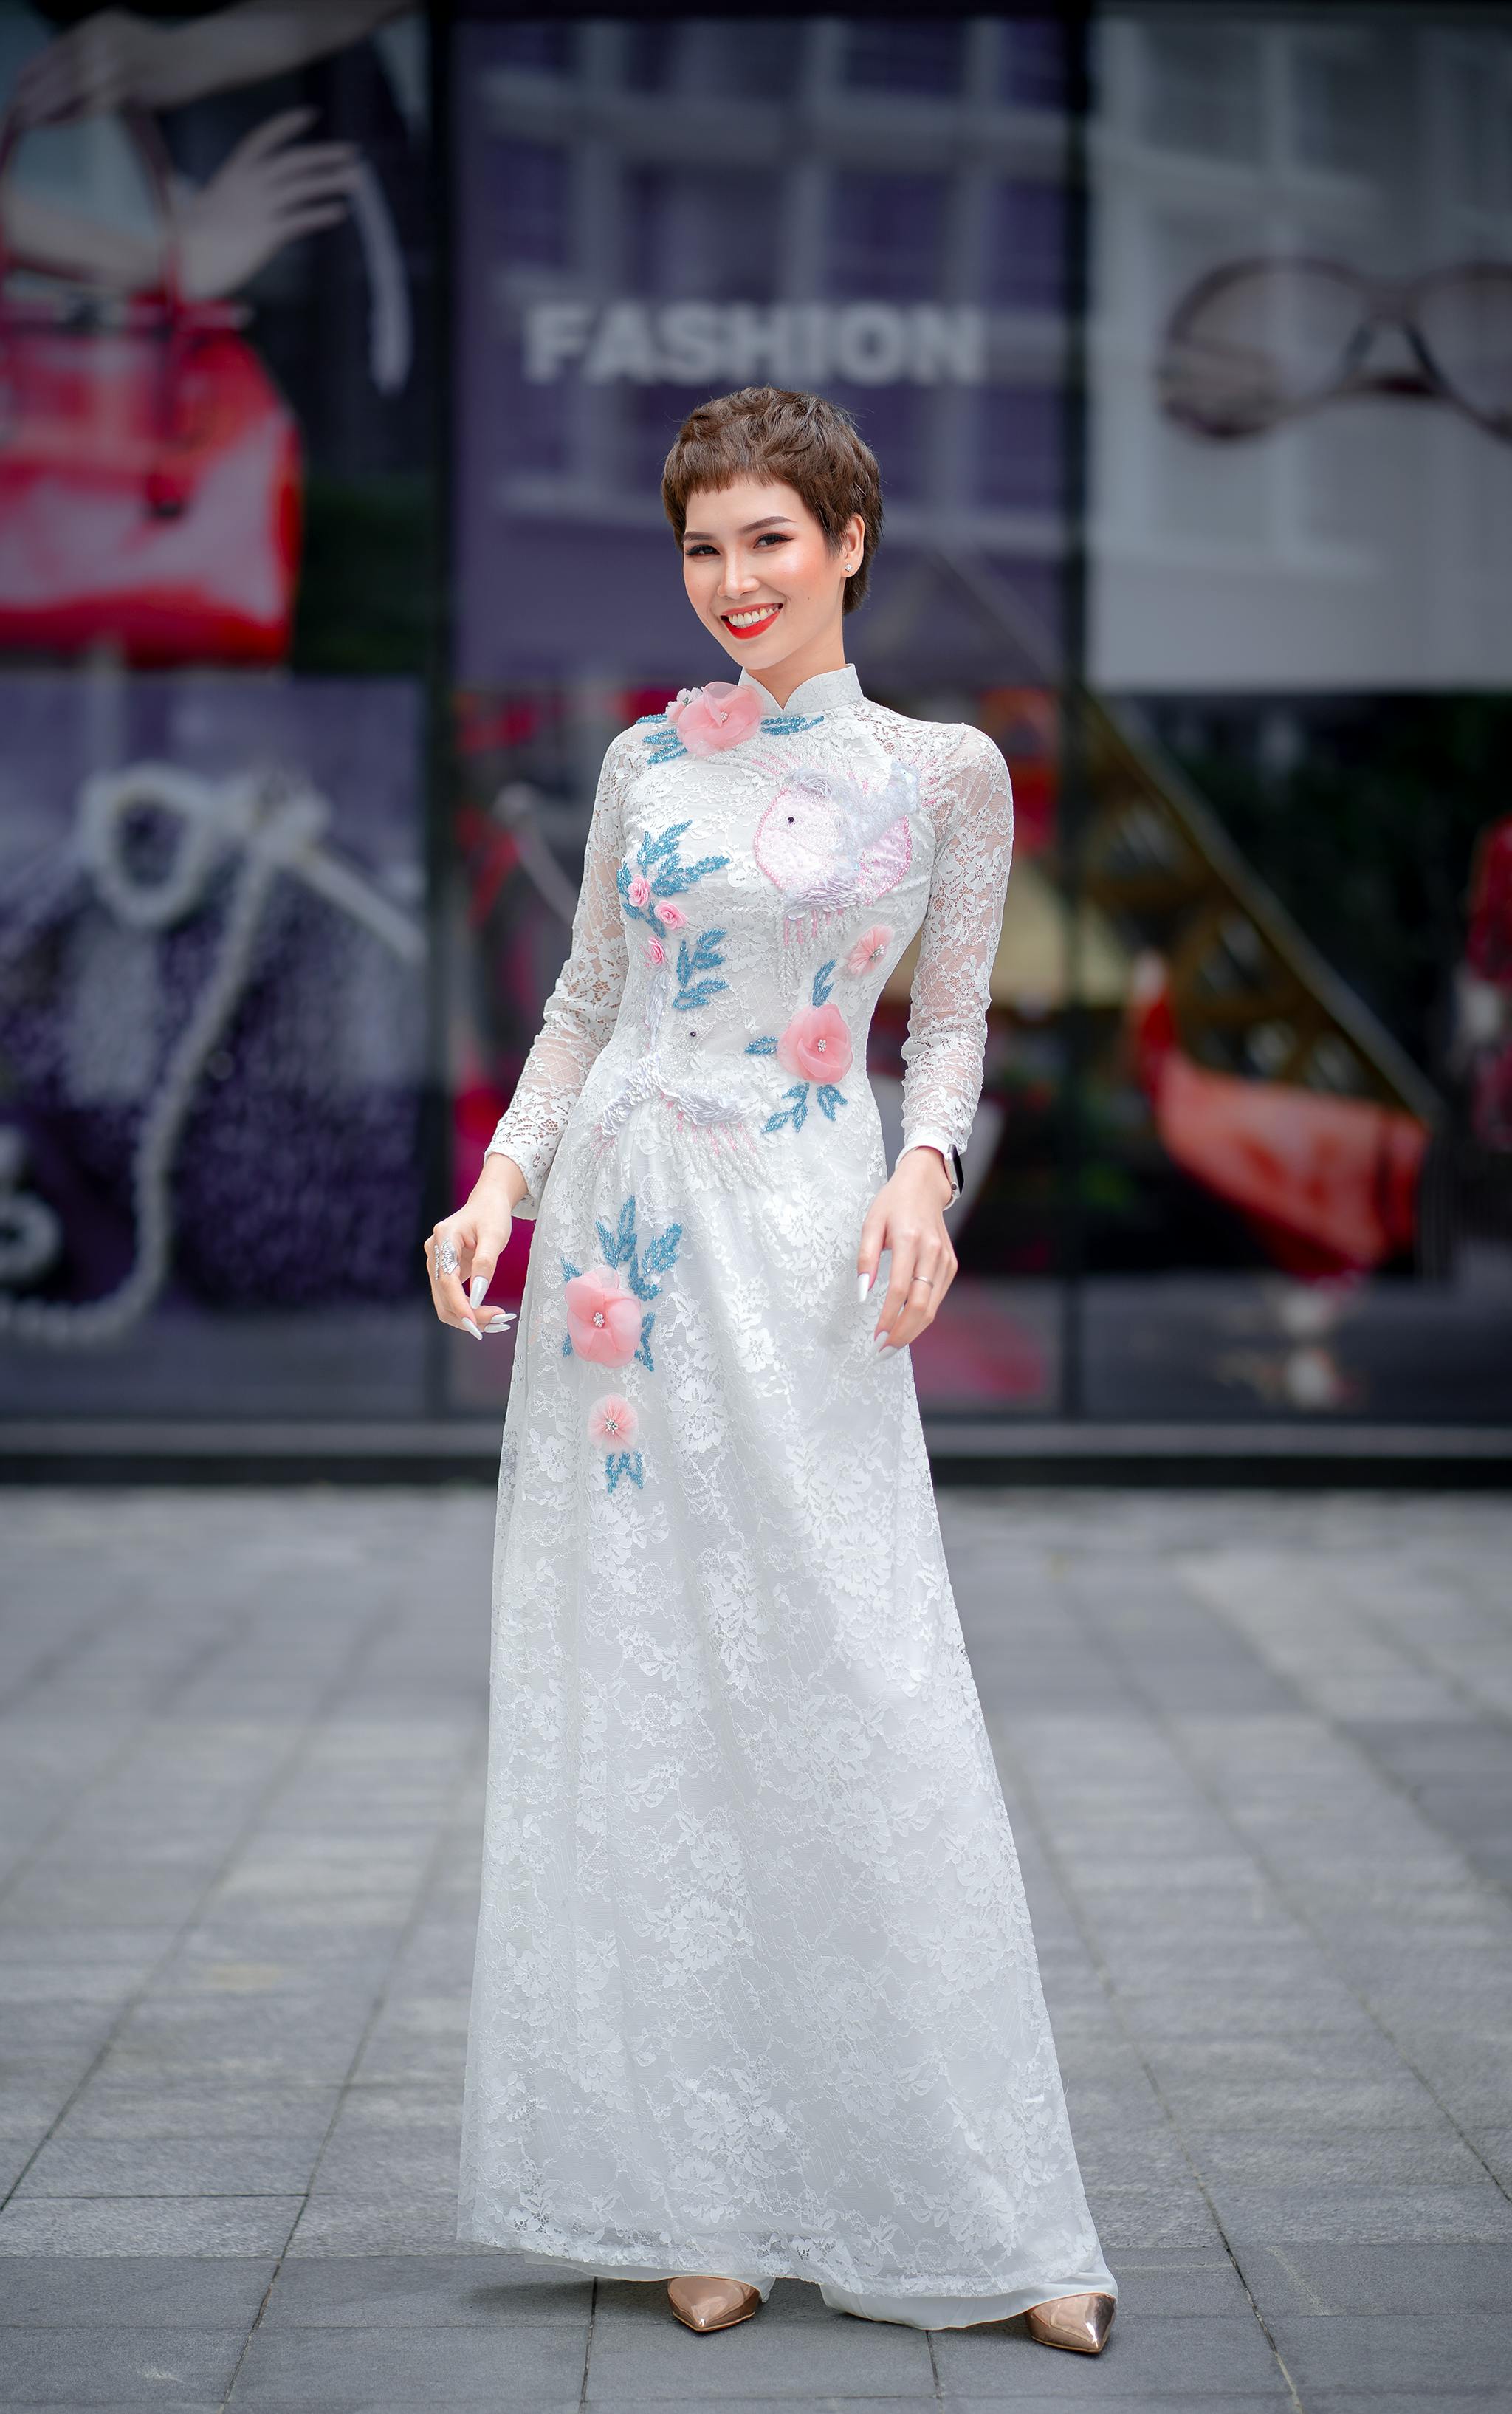 woman in white floral long dress standing on gray pavement